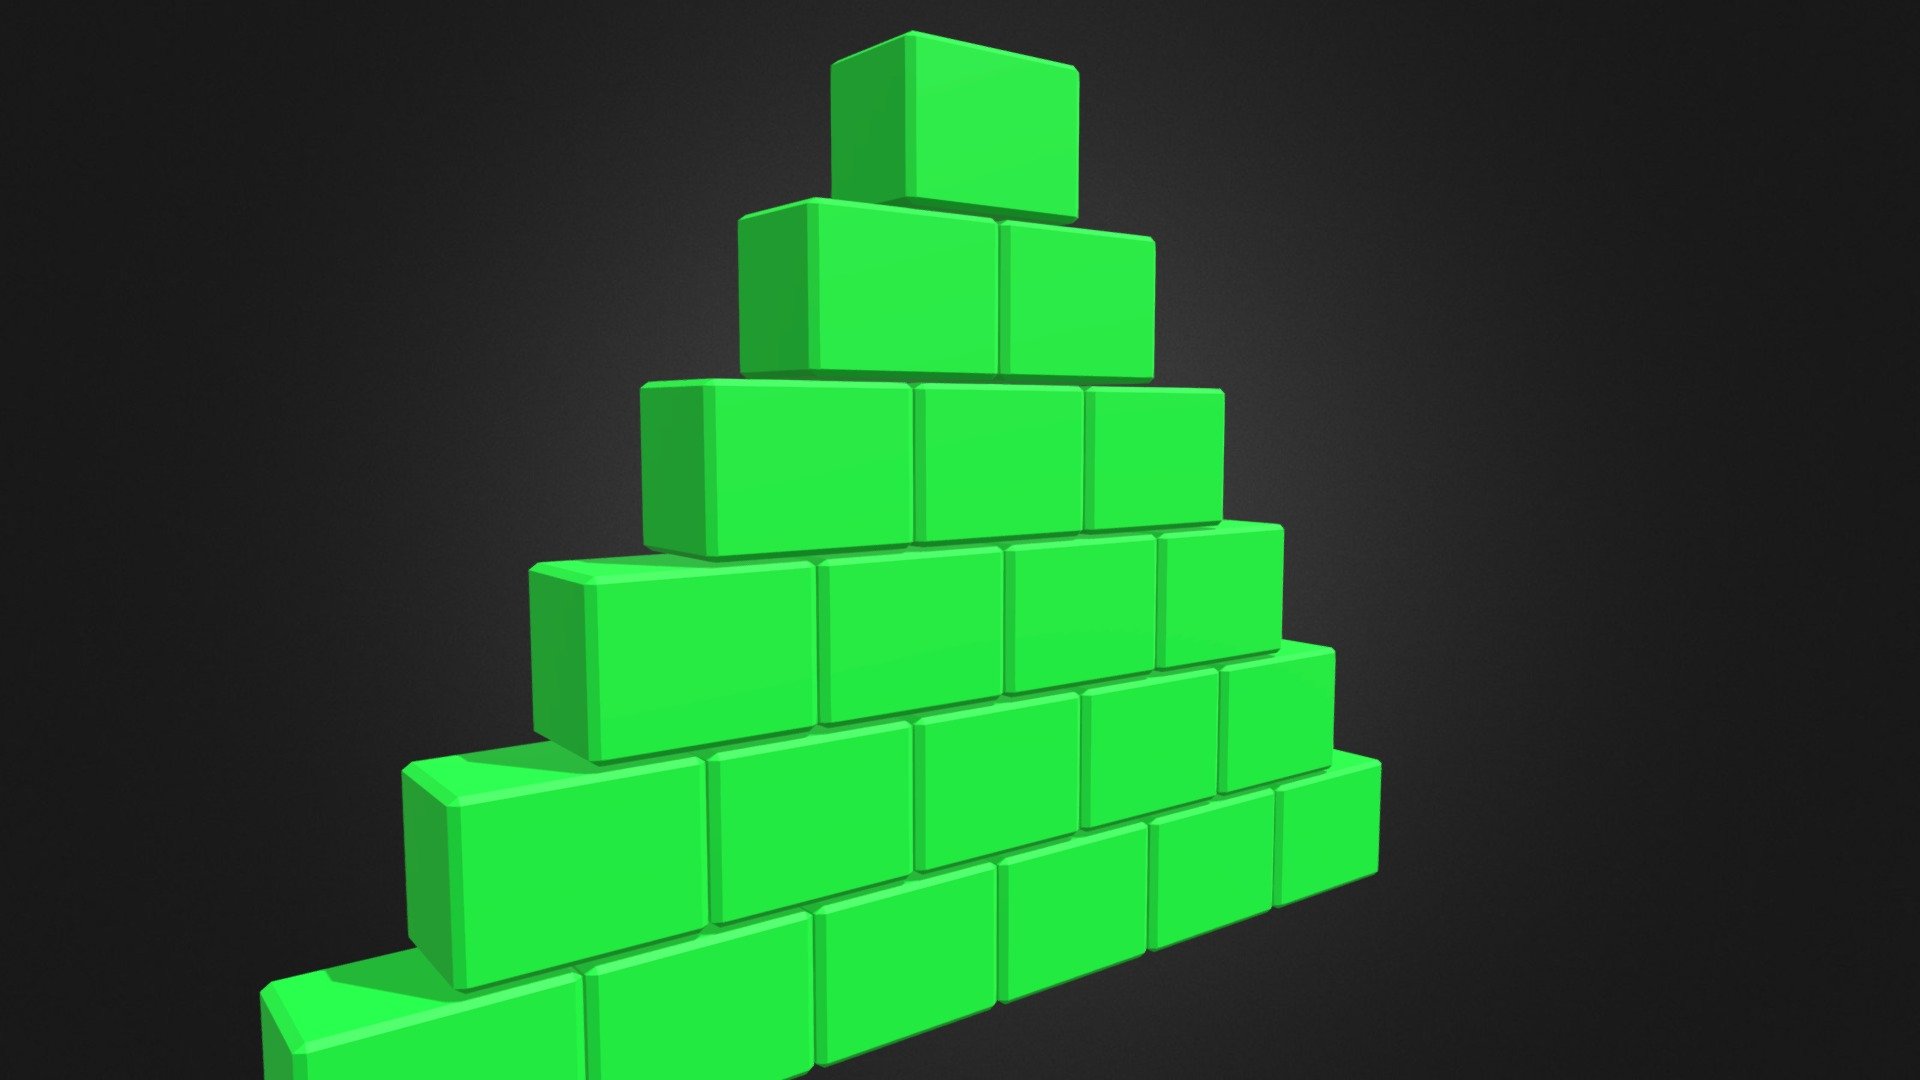 contact for purchase +923149343181 WhatsApp
Green_Destructible_Fs22_Blocks_Gameready_3D_Block_Model, Suitable for Beamng, Specially for FS22(i3D Gameready FS22) and Importable for any 3D Software. Thanks

youtube(video of blocks)❤️
https://youtu.be/Pt8Bv0F6et8 - Green_Destructible_Fs22_Blocks - 3D model by saqlain (@mirzabaig4445) 3d model